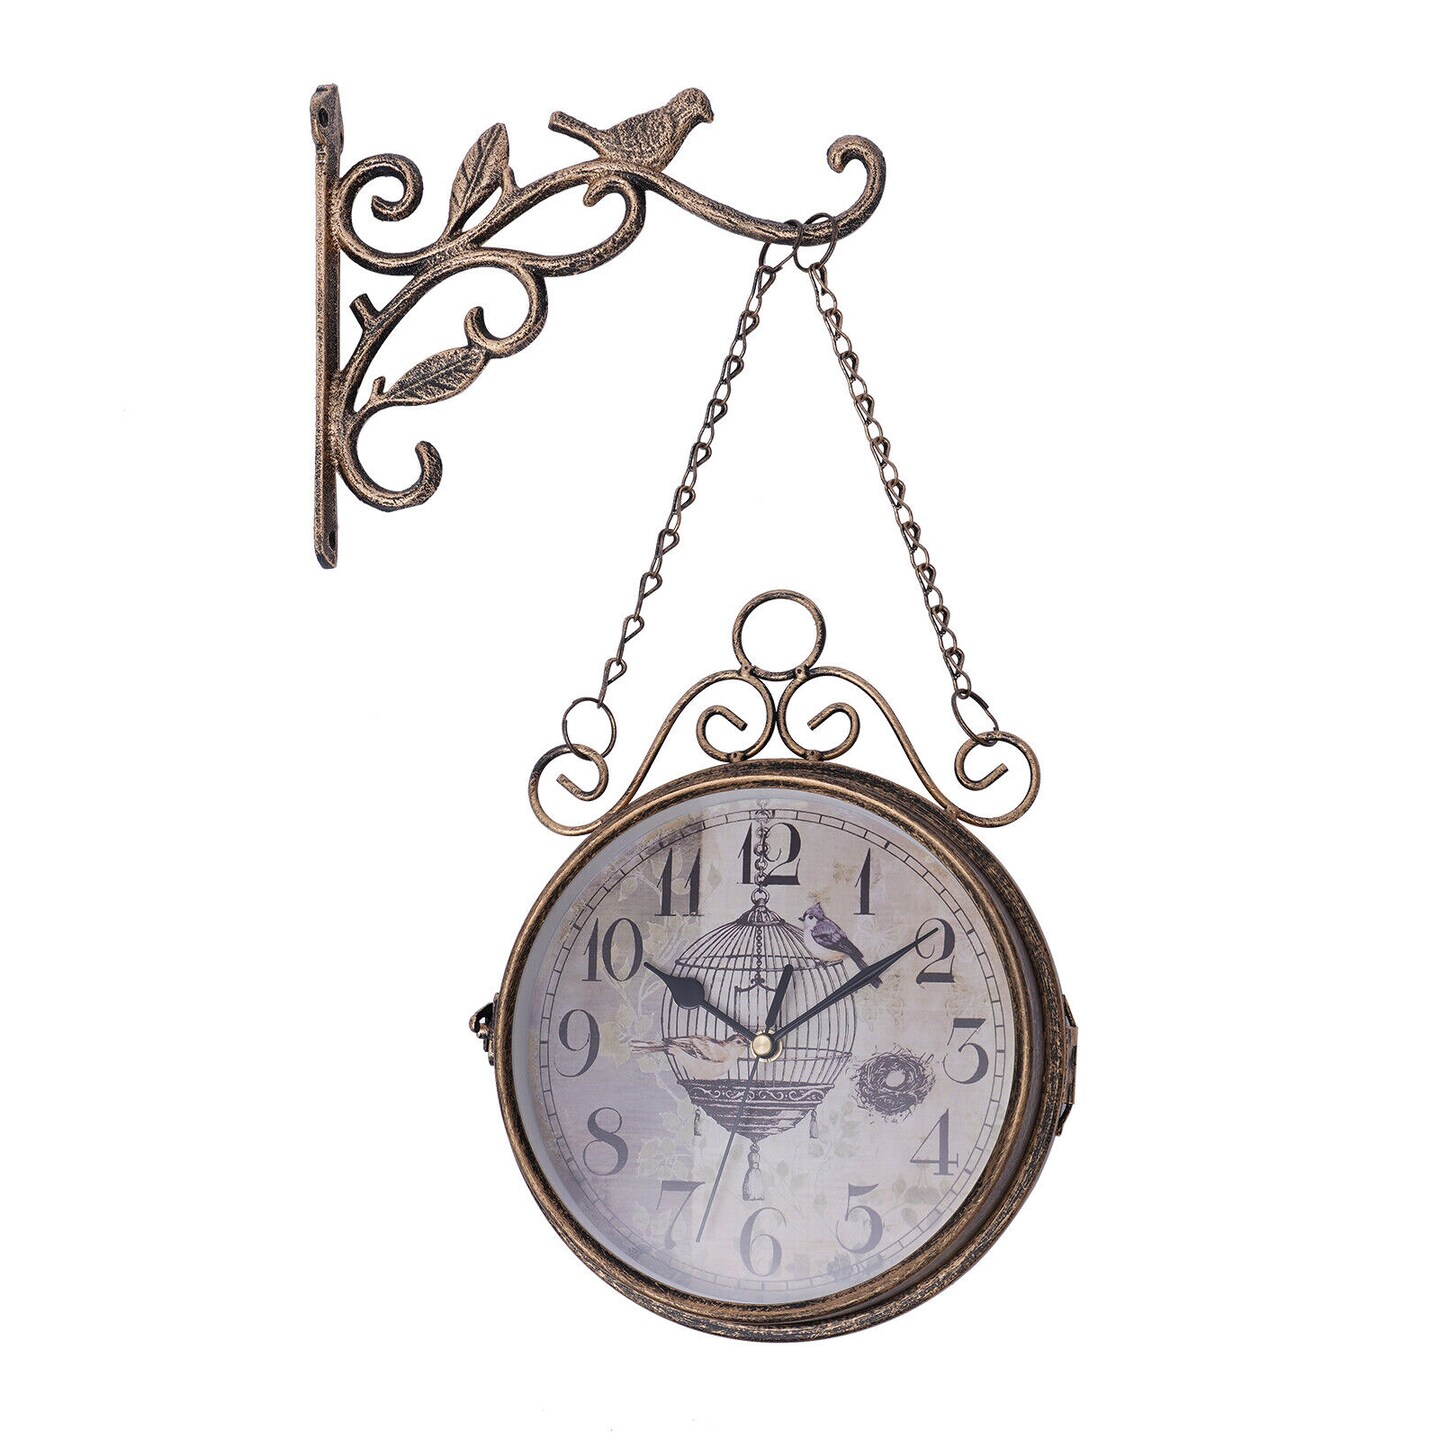 Kitcheniva Gentral Station Wall Clock Vintage Double Sided Hanging Clock